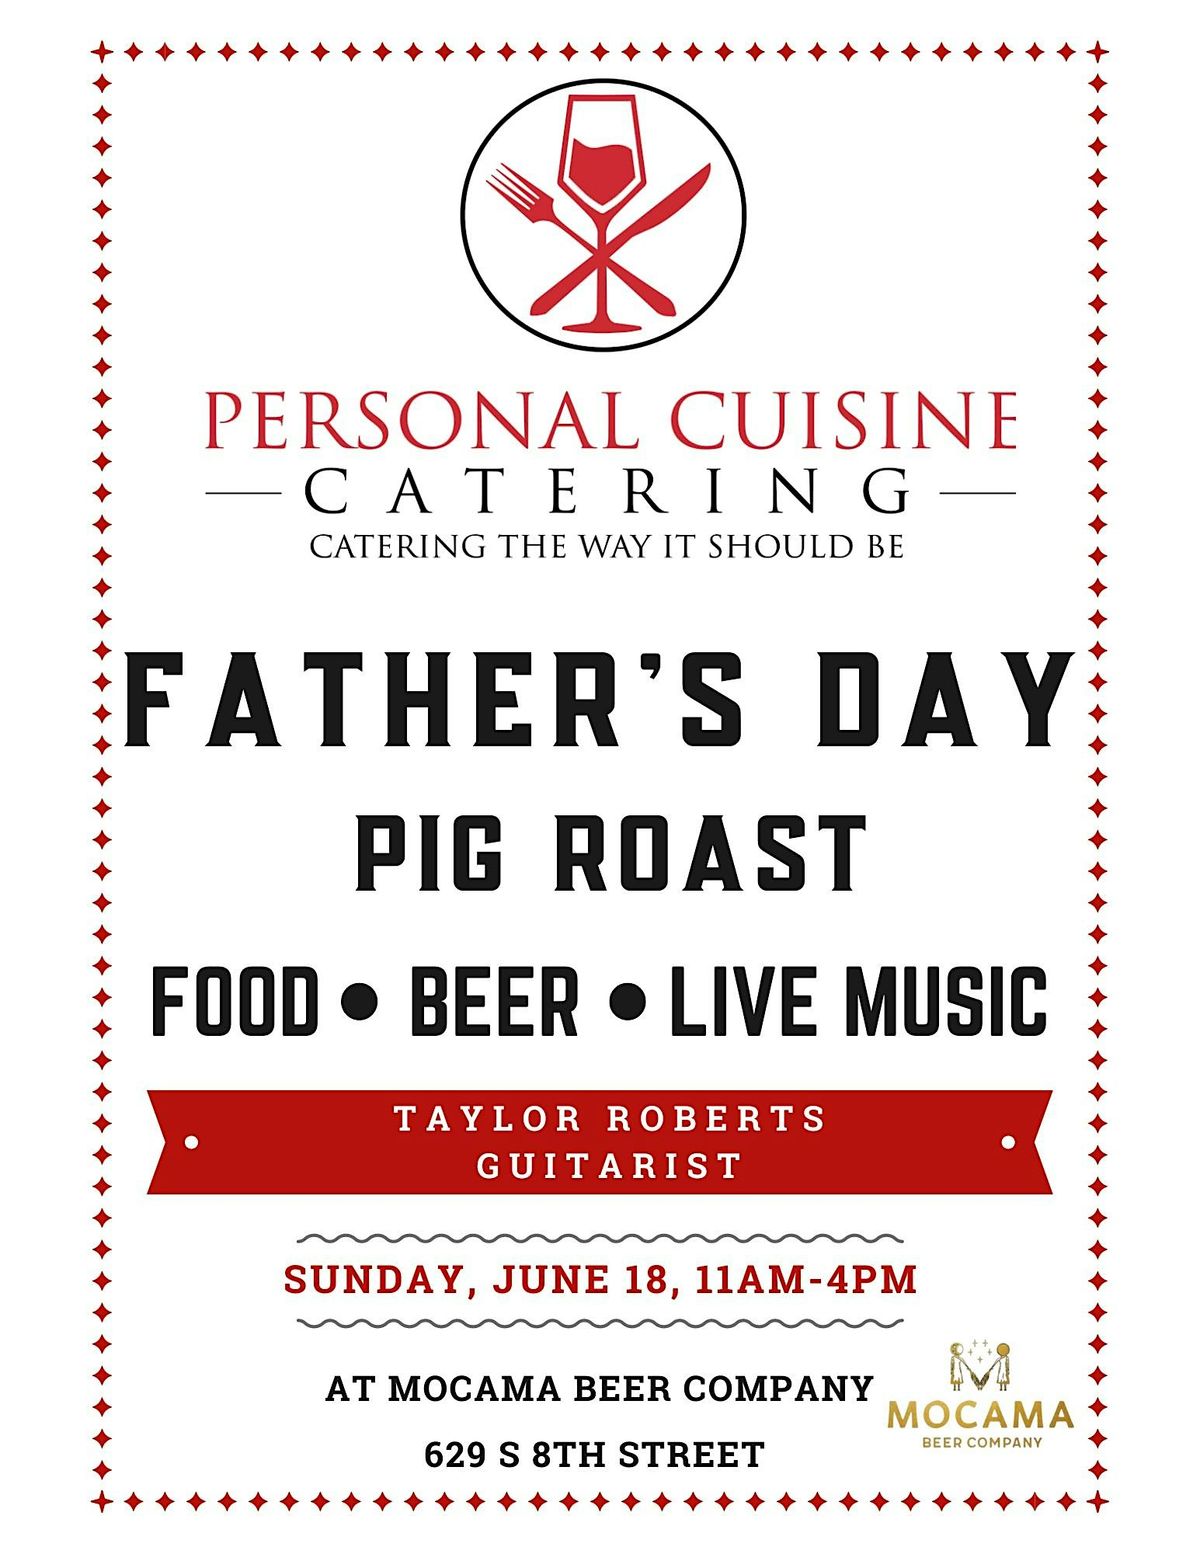 Father's Day Pig Roast